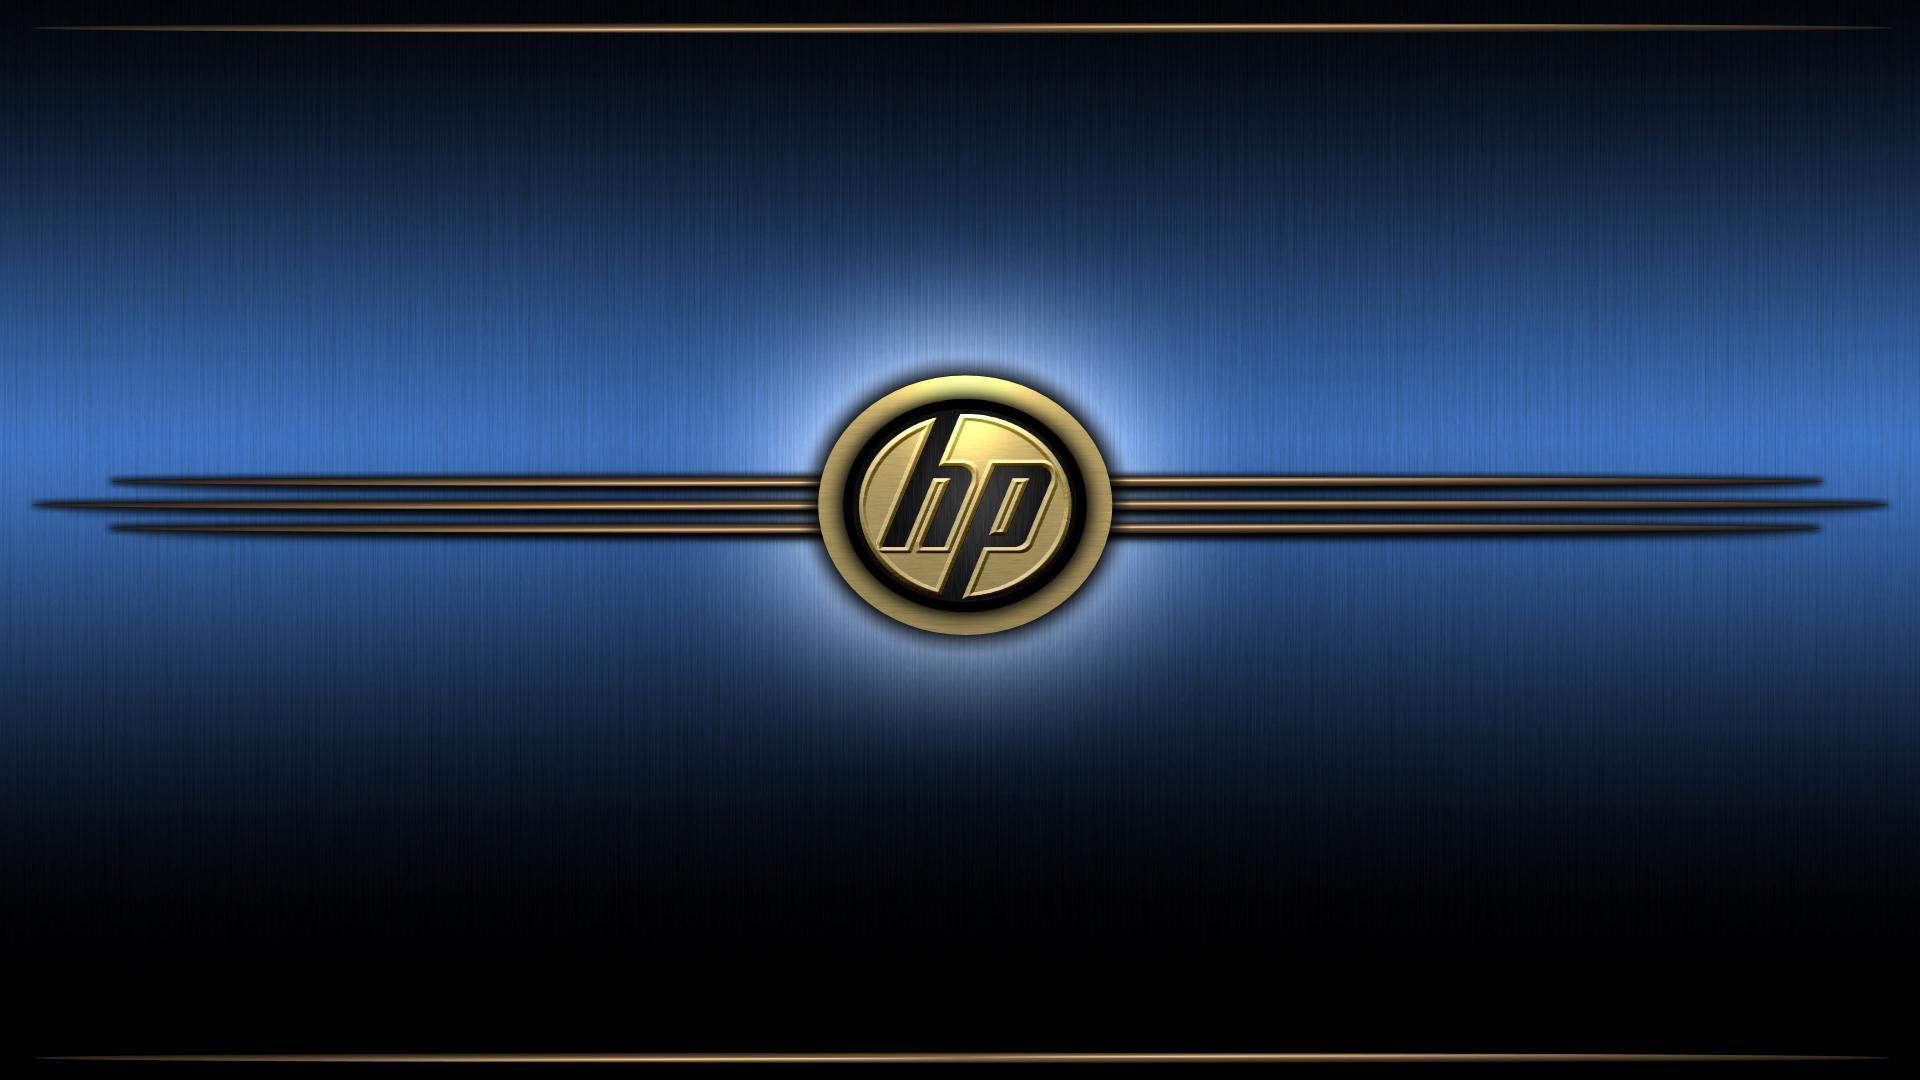 Hp Pavilion wallpapers